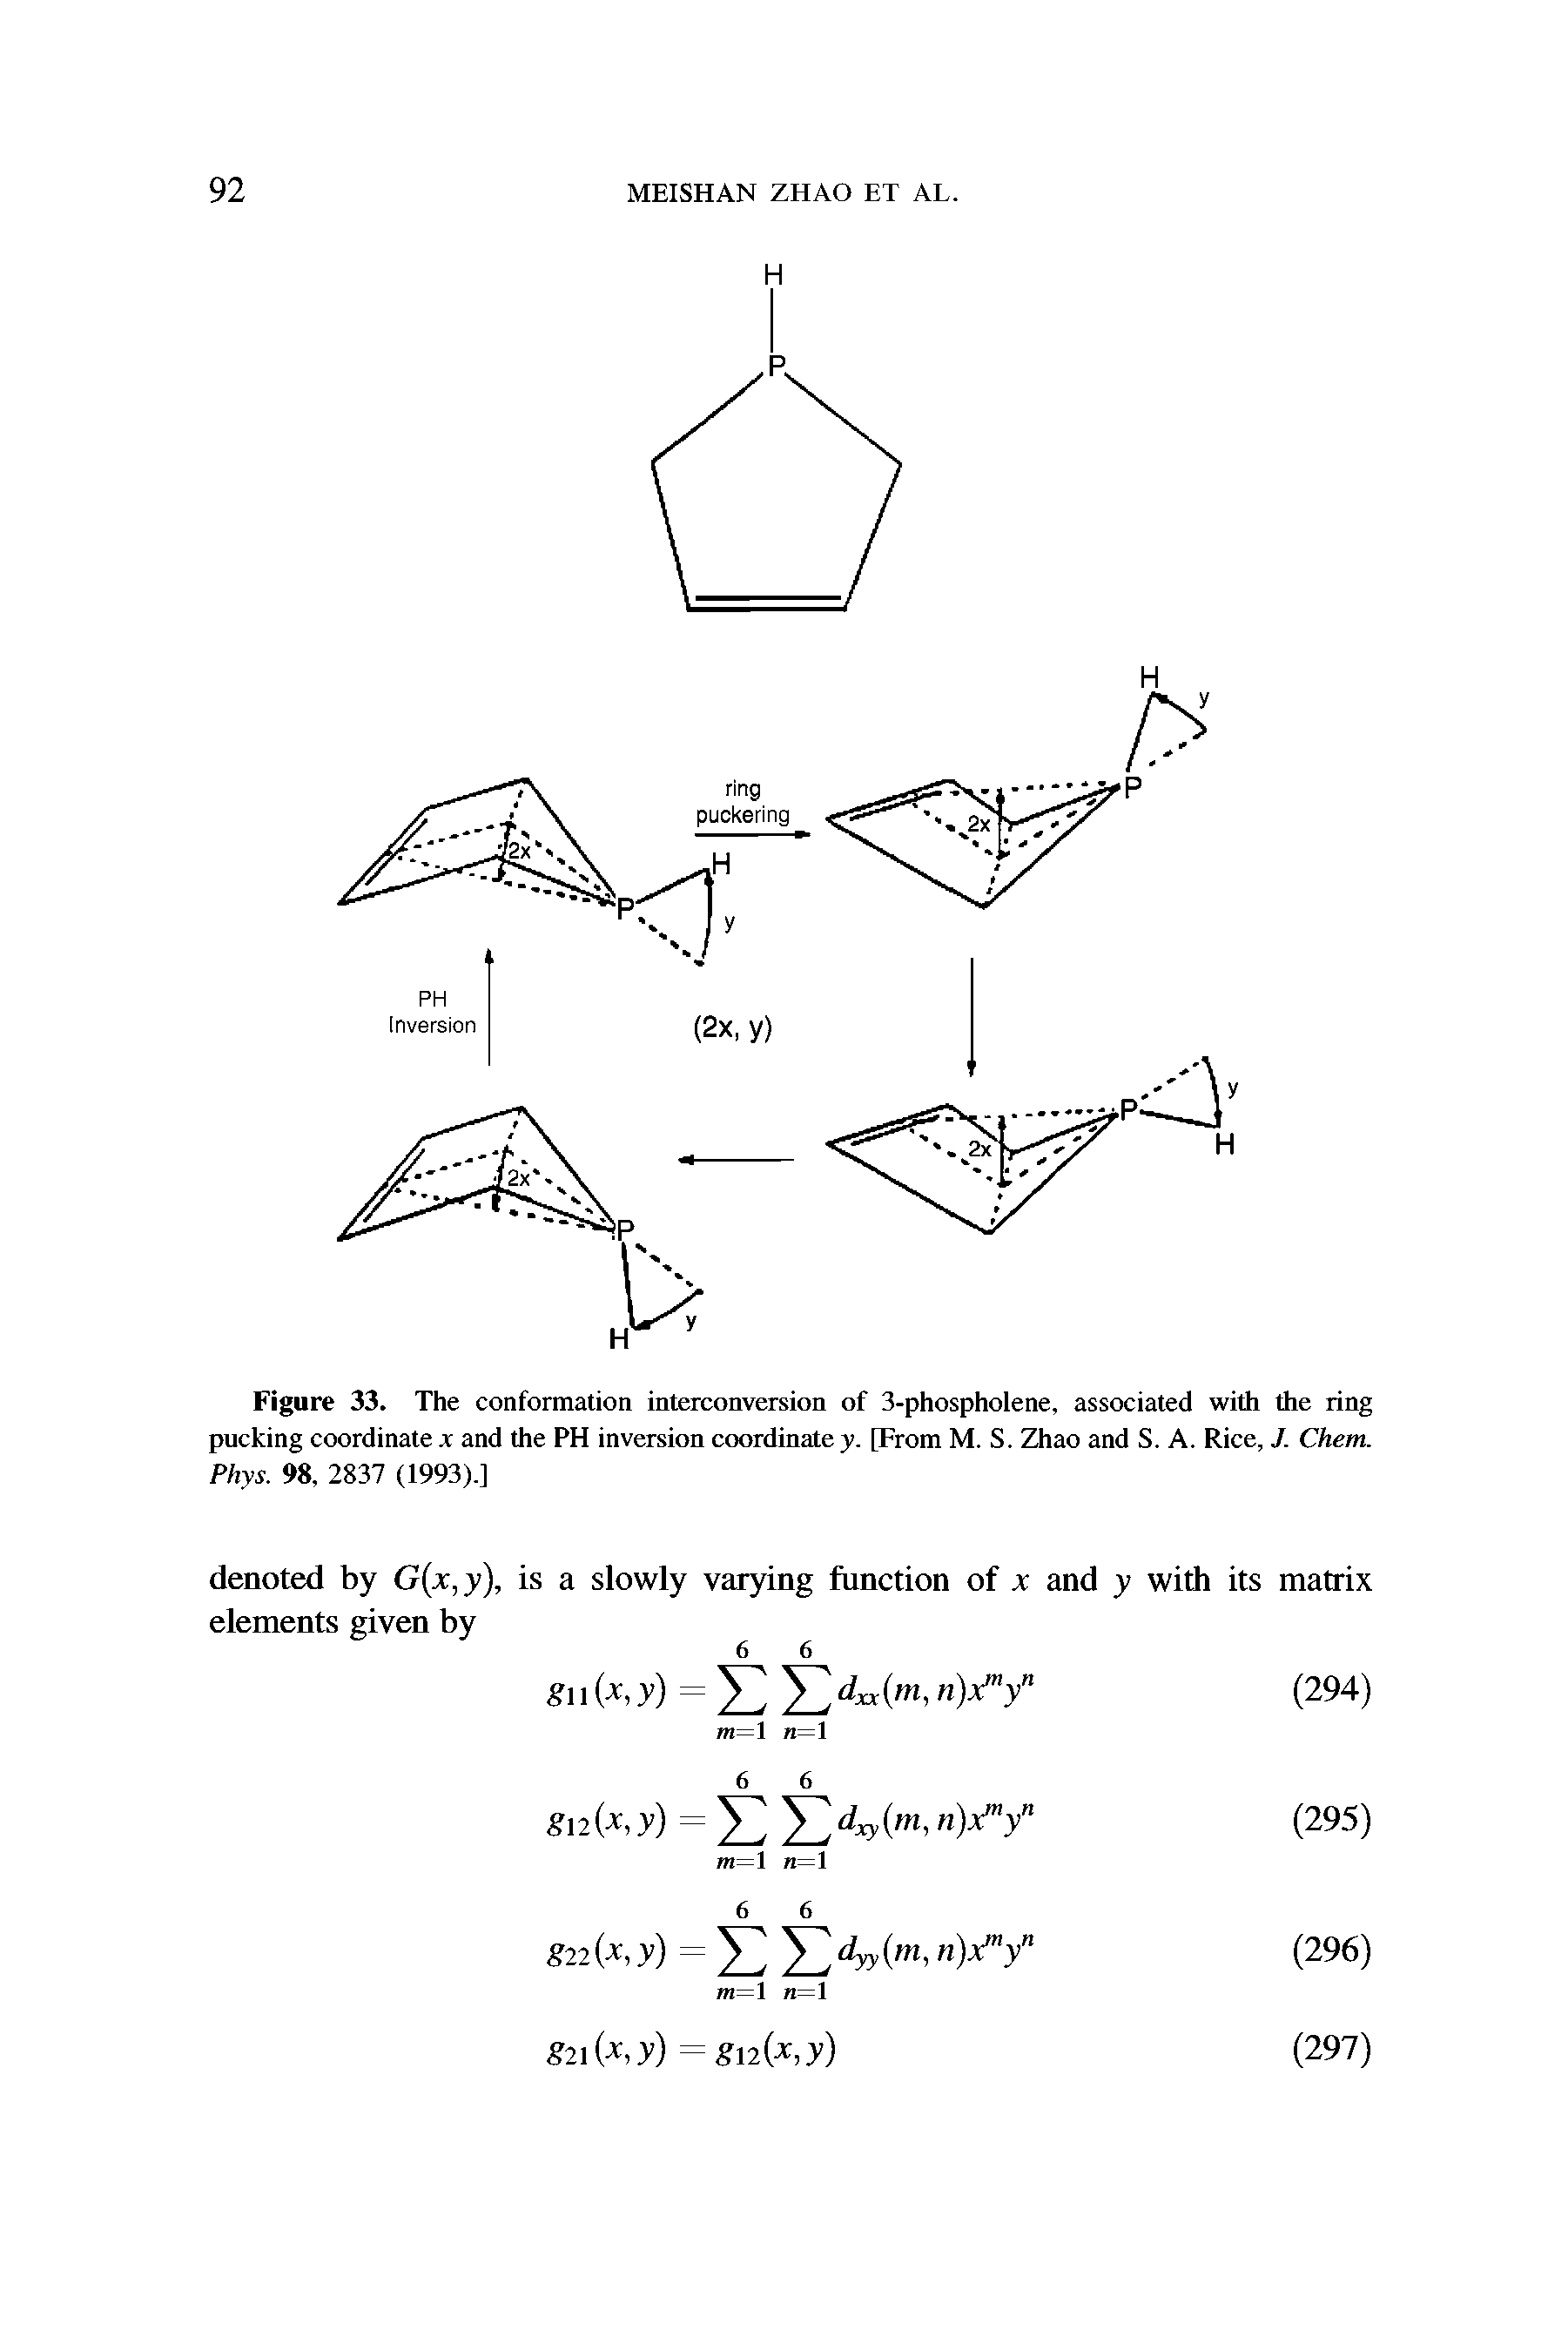 Figure 33. The conformation interconversion of 3-phospholene, associated with the ring pucking coordinate x and the PH inversion coordinate y. [From M. S. Zhao and S. A. Rice, J. Chem. Phys. 98, 2837 (1993).]...